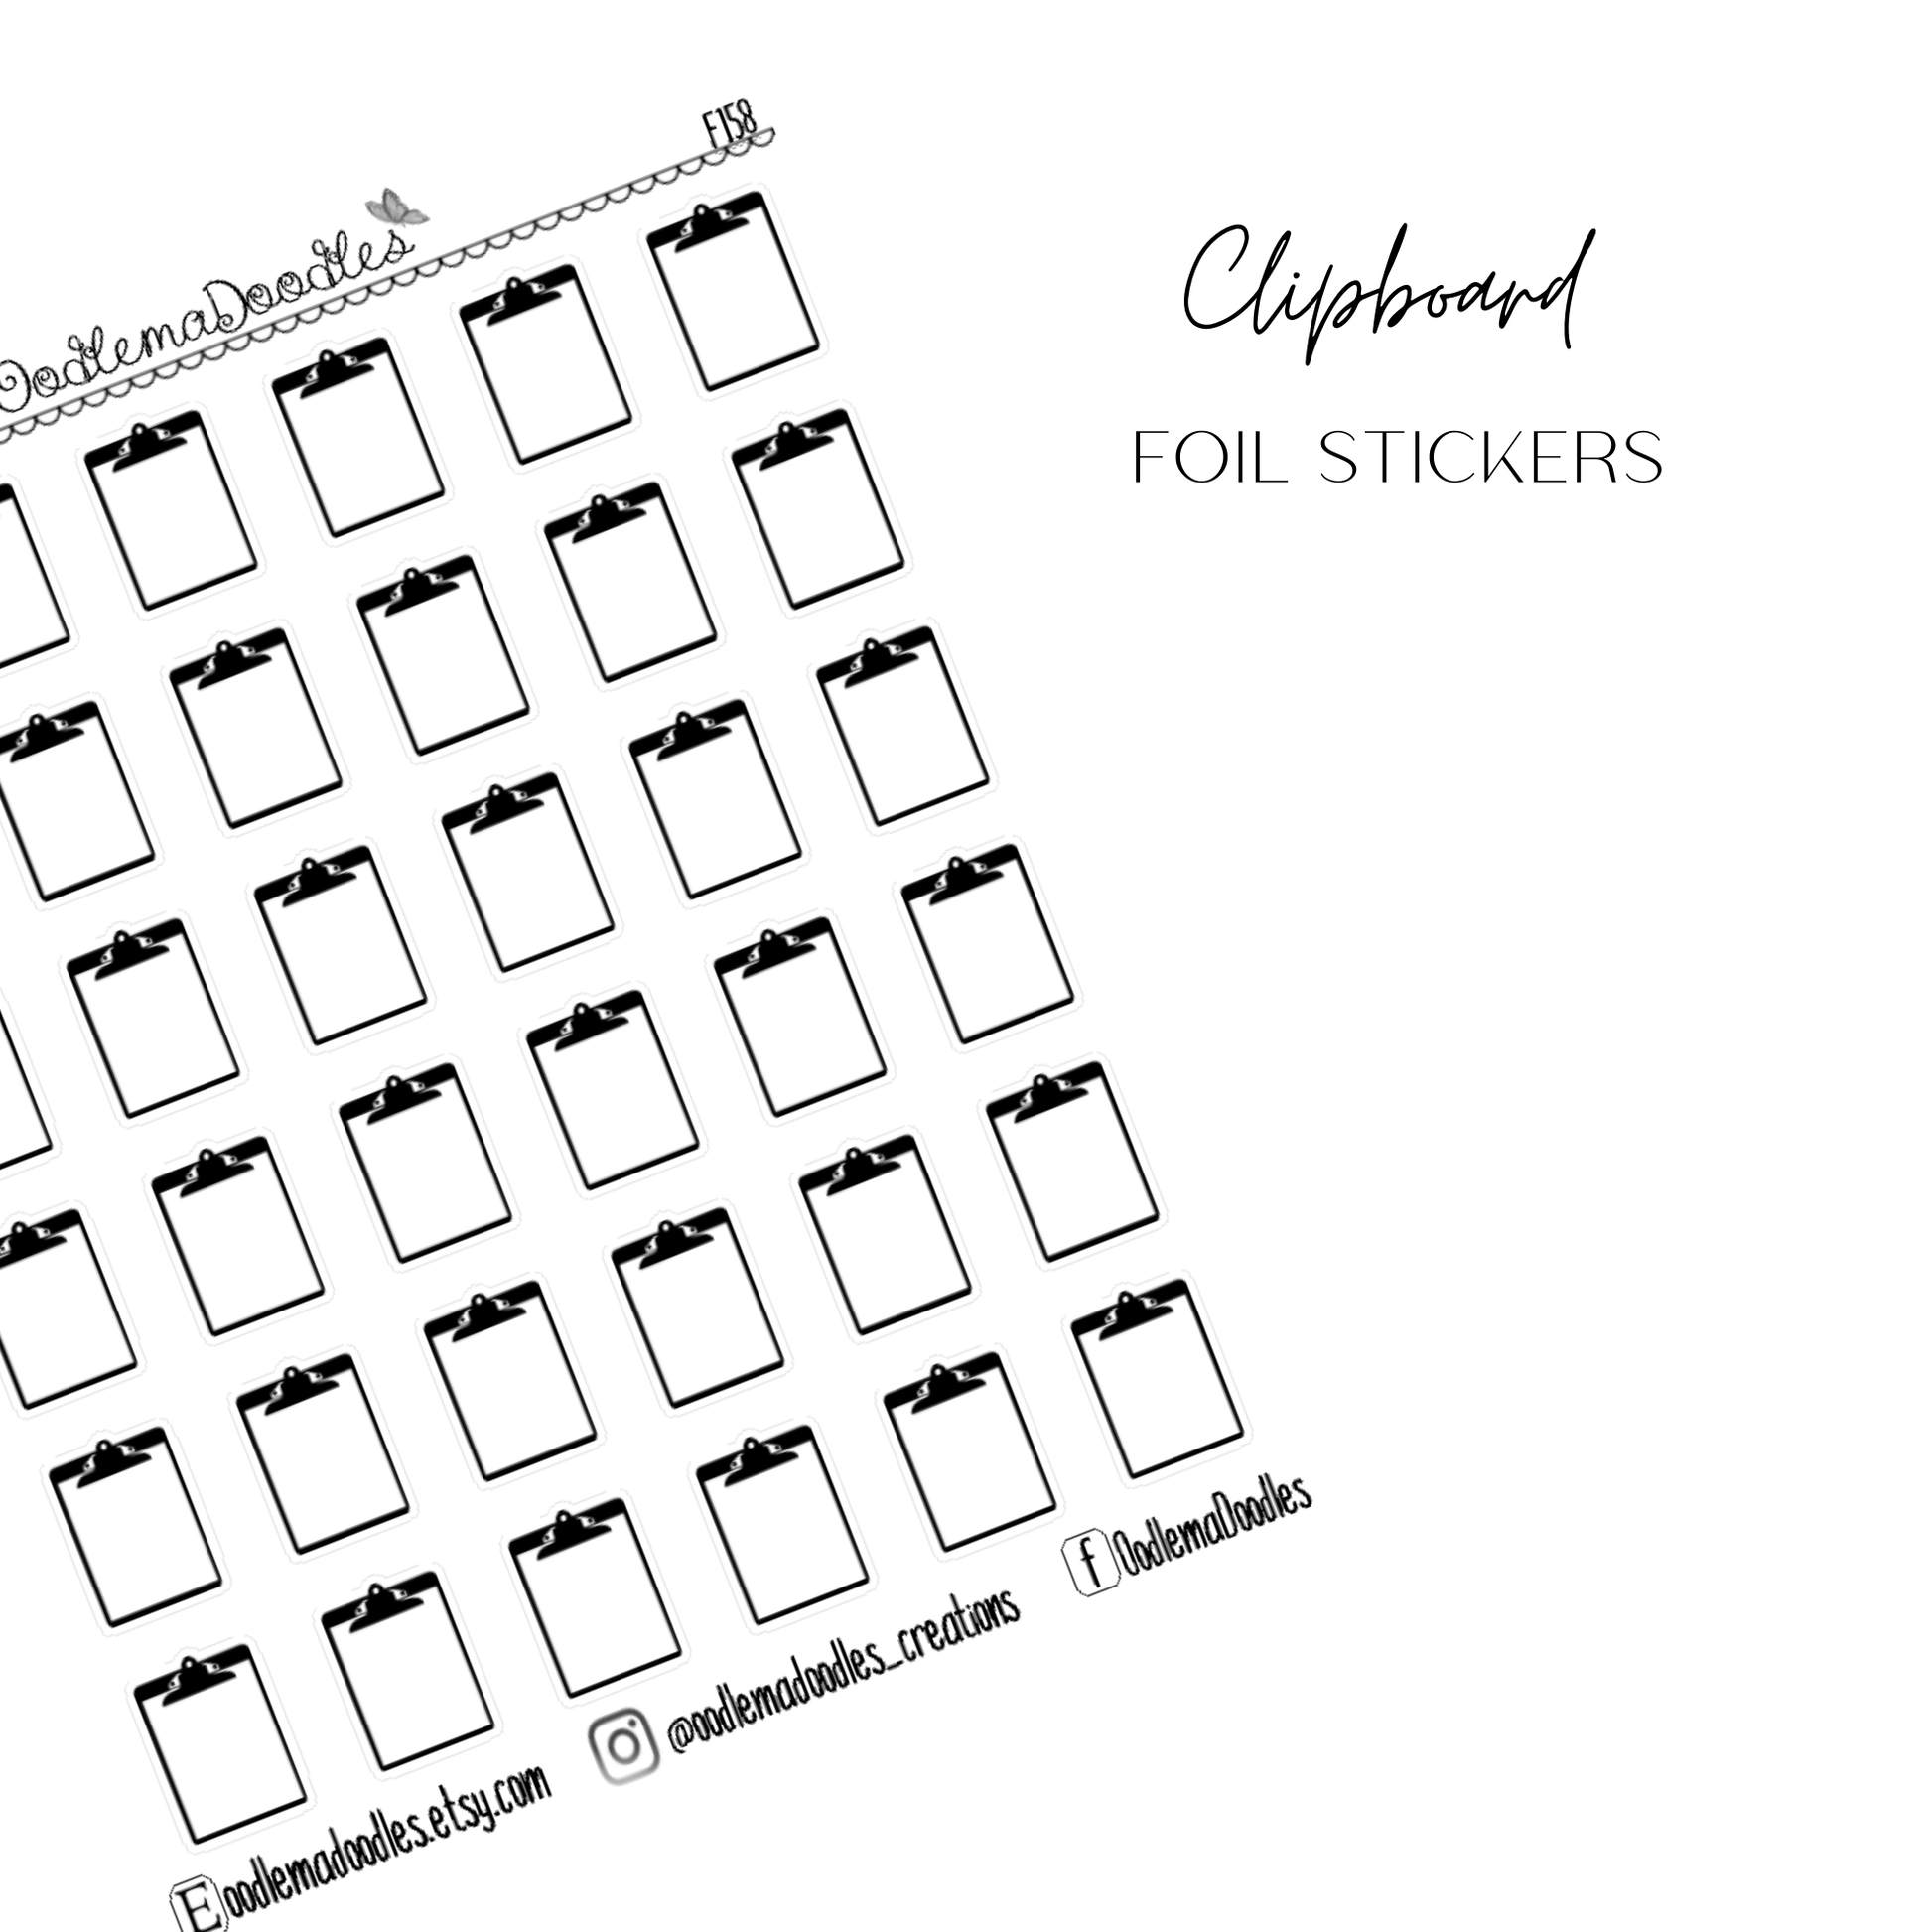 Clipboard Stickers - oodlemadoodles